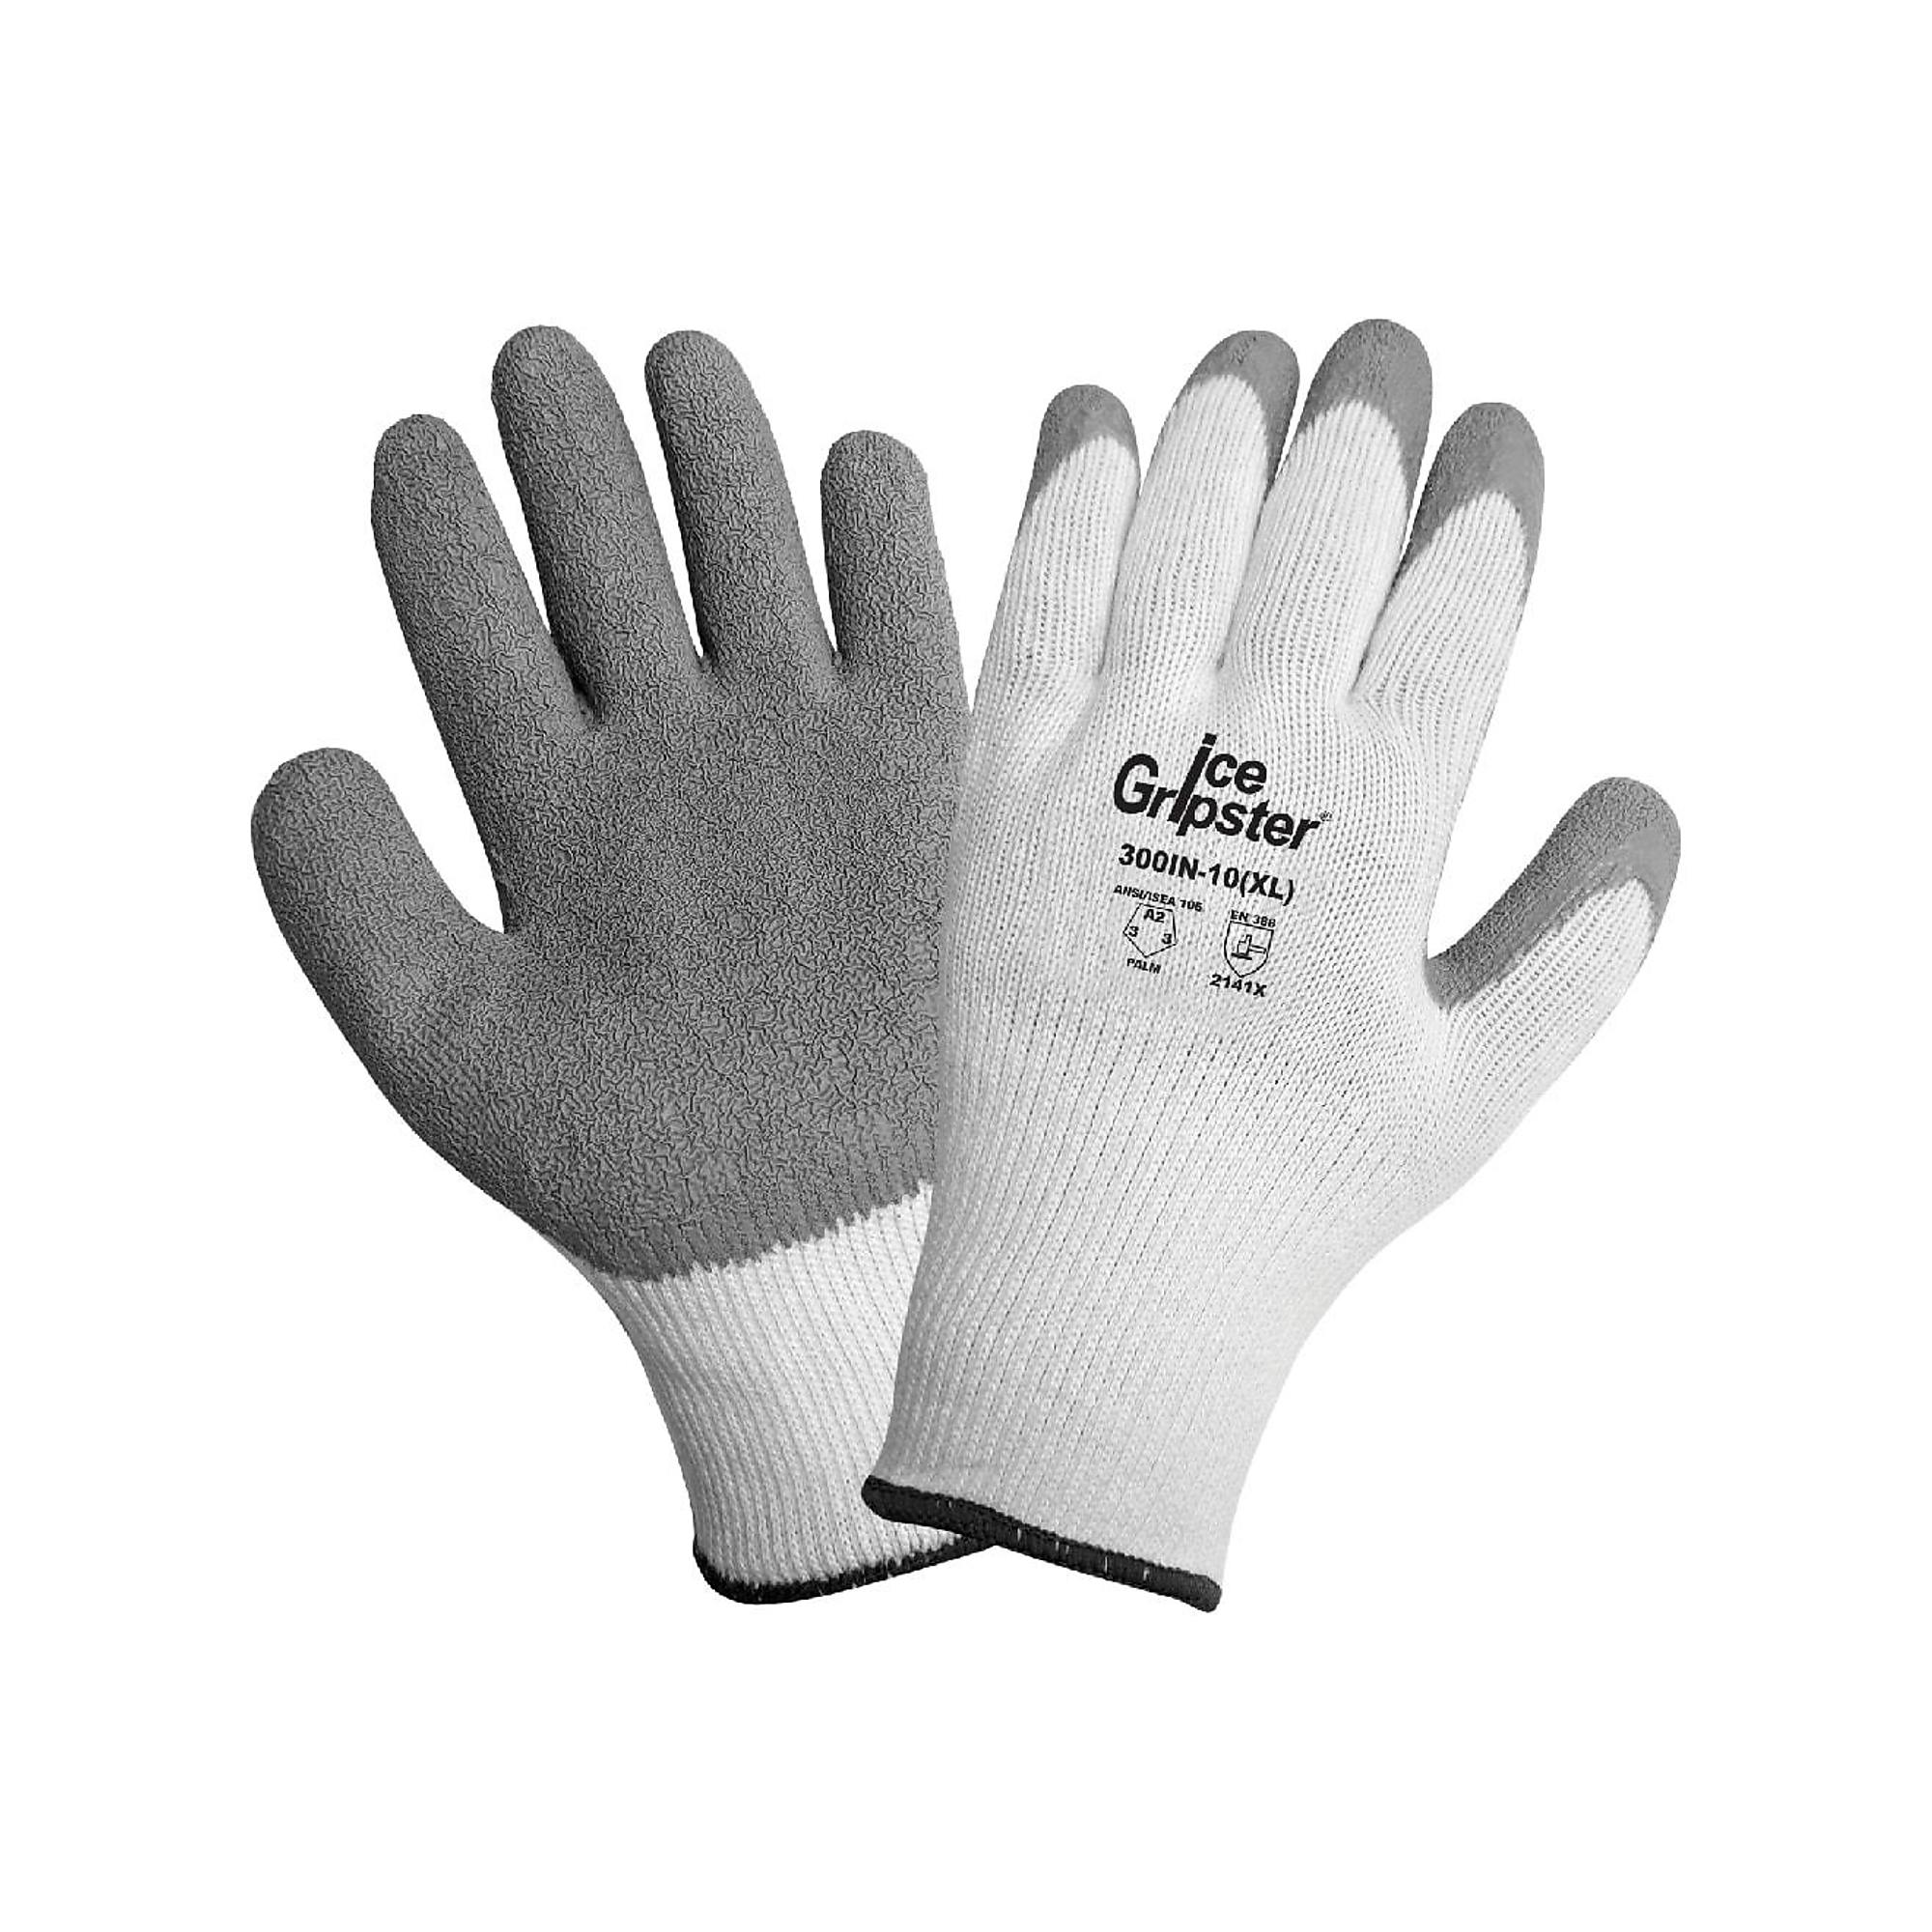 Global Glove Ice Gripster , White, Insulated, Rubber Dip, Cut Resist A2 Gloves- 12 Pairs, Size XL, Color White/Gray, Included (qty.) 12 Model 300IN-10